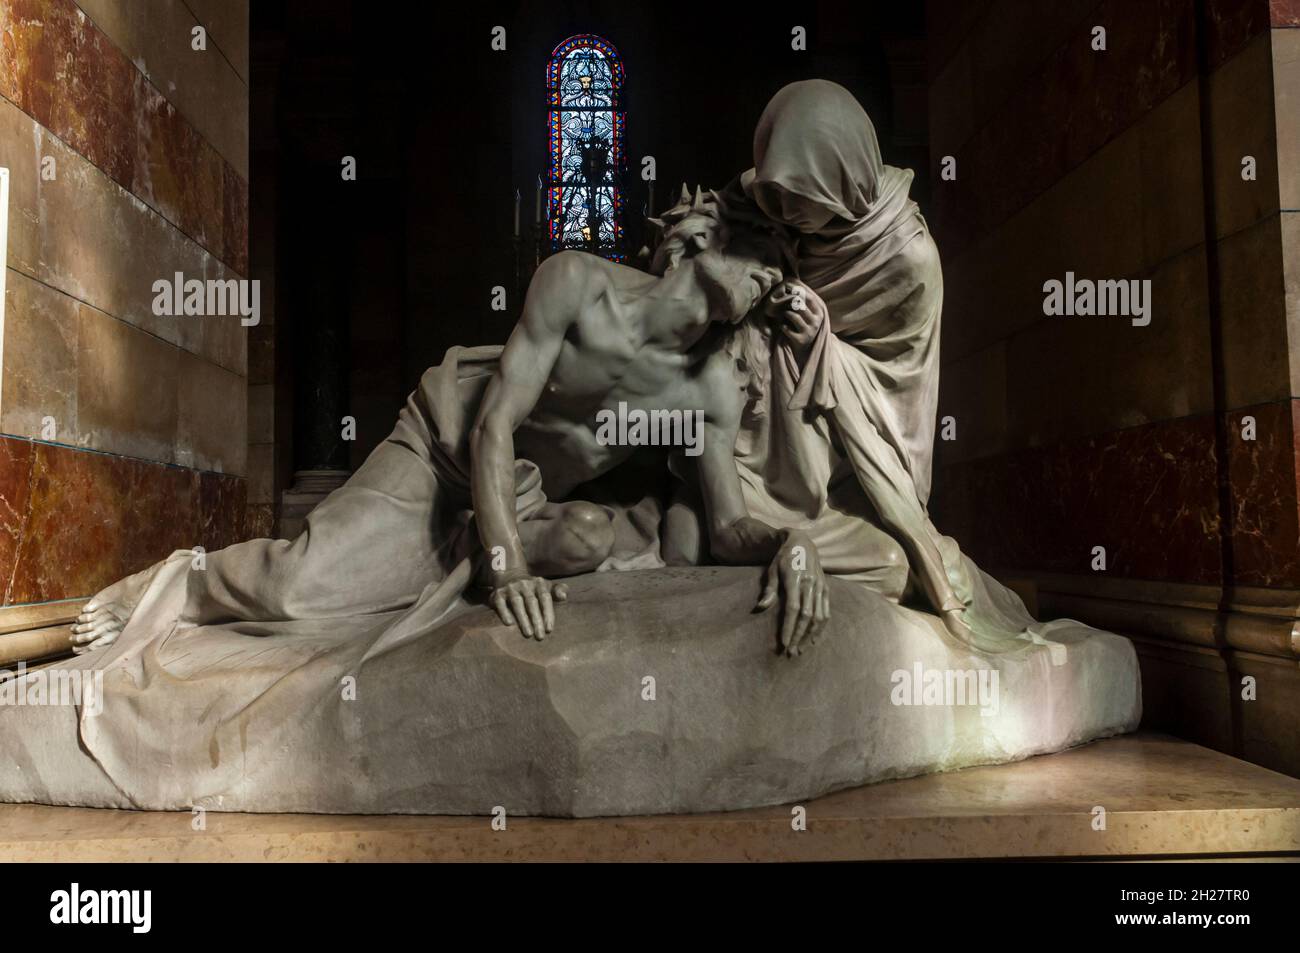 Statue of Christ and Saint Veronica in the Basilique-Cathédrale Sainte-Marie-Majeure, Marseille, Provence, France Stock Photo